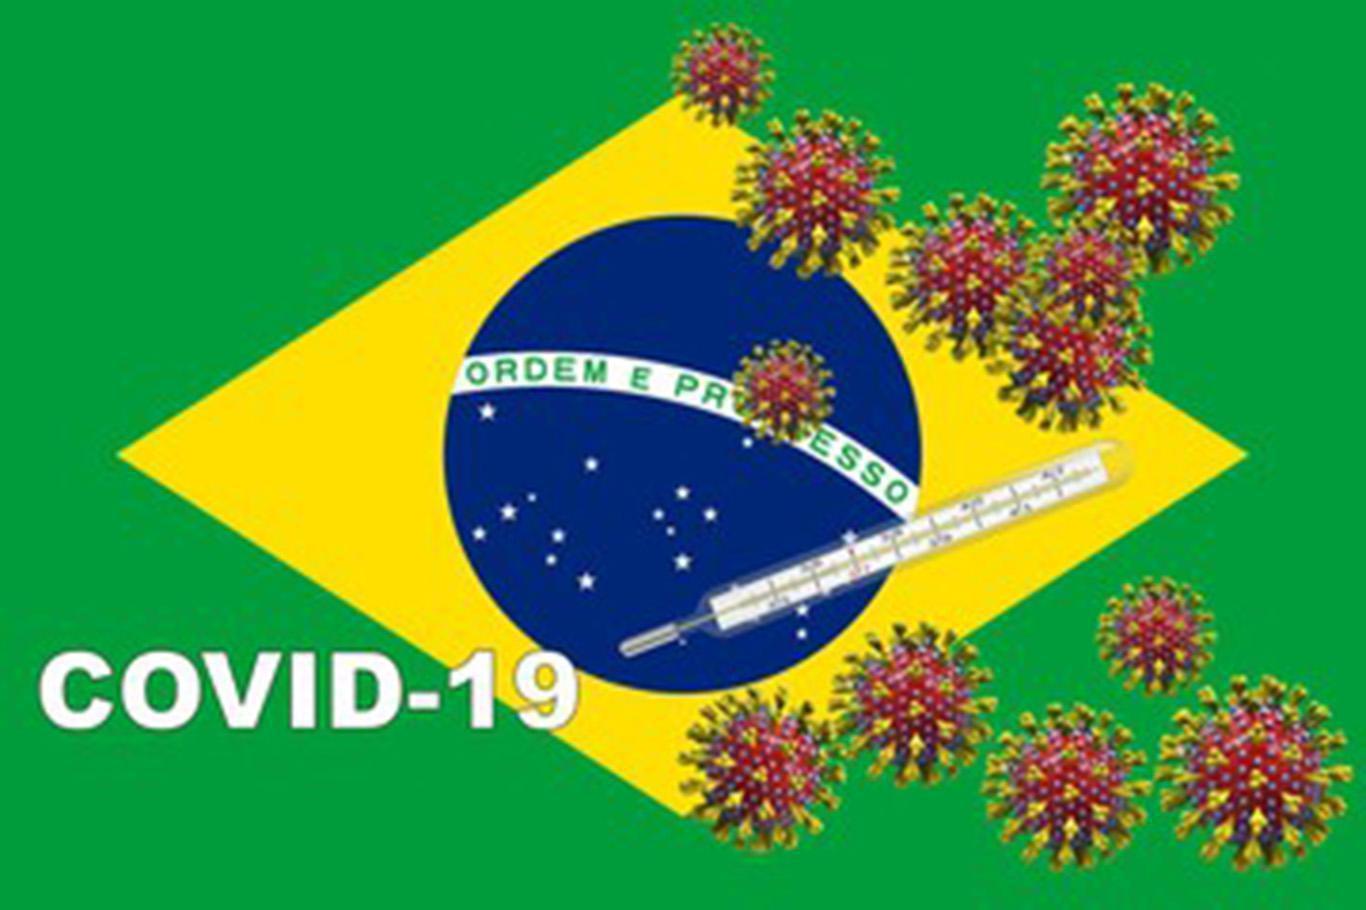 Coronavirus: Brazil reports 1,058 new deaths, 49,502 cases in the last 24 hours